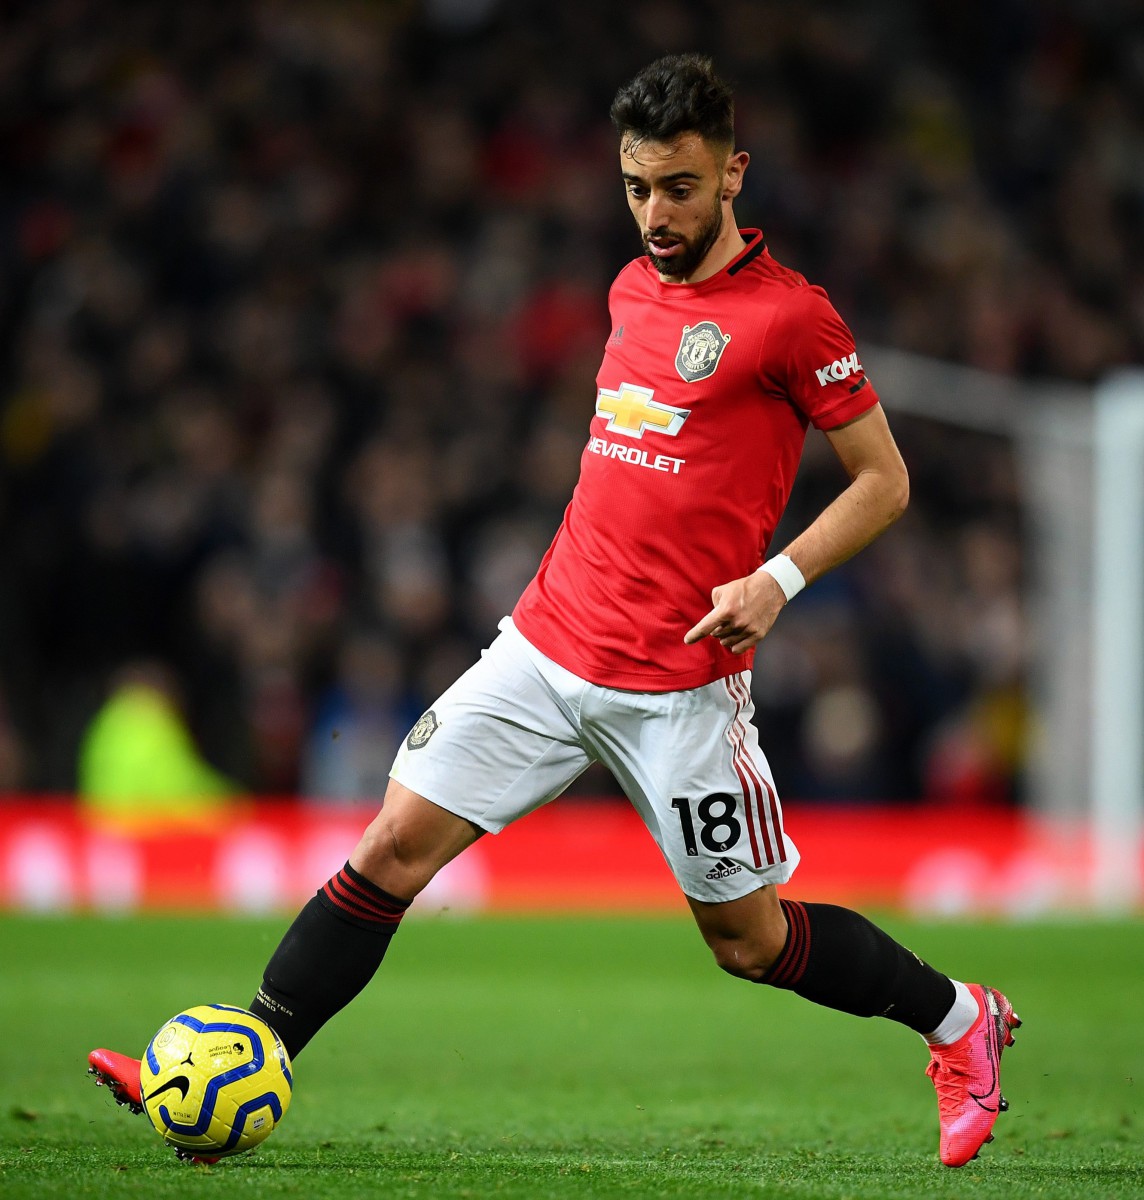 The Portuguese star made his Manchester United debut on Saturday in the 0-0 draw with Wolves